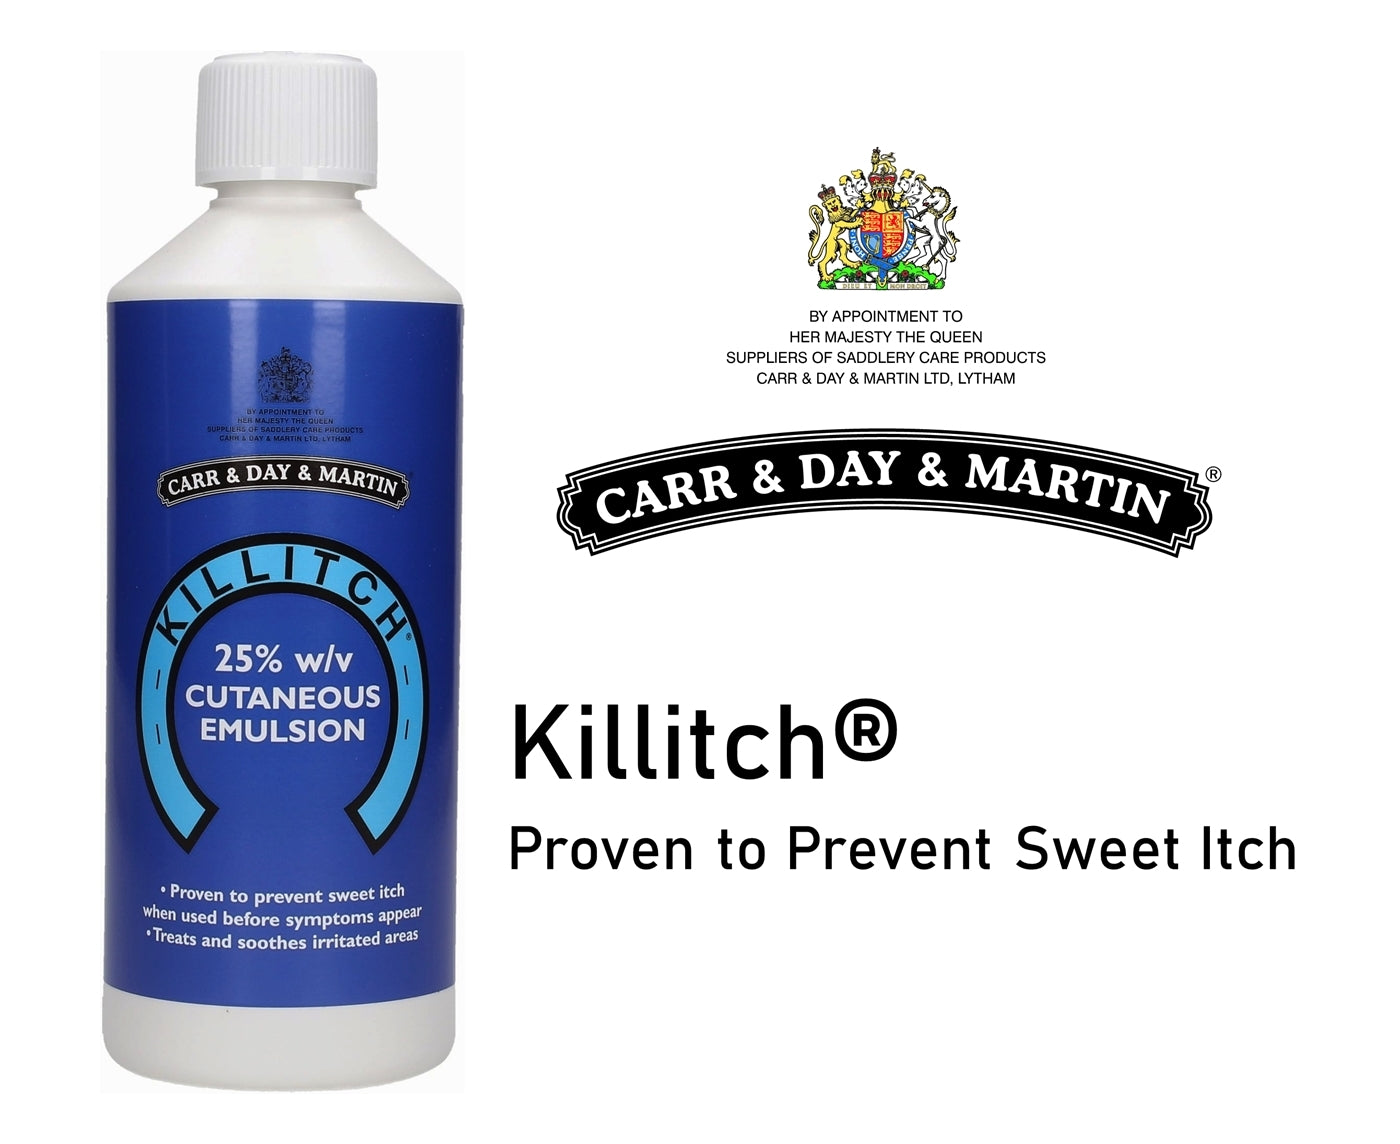 Carr & Day & Martin - Killitch | Treats Sweet Itch in Horses - Buy Online SPR Centre UK